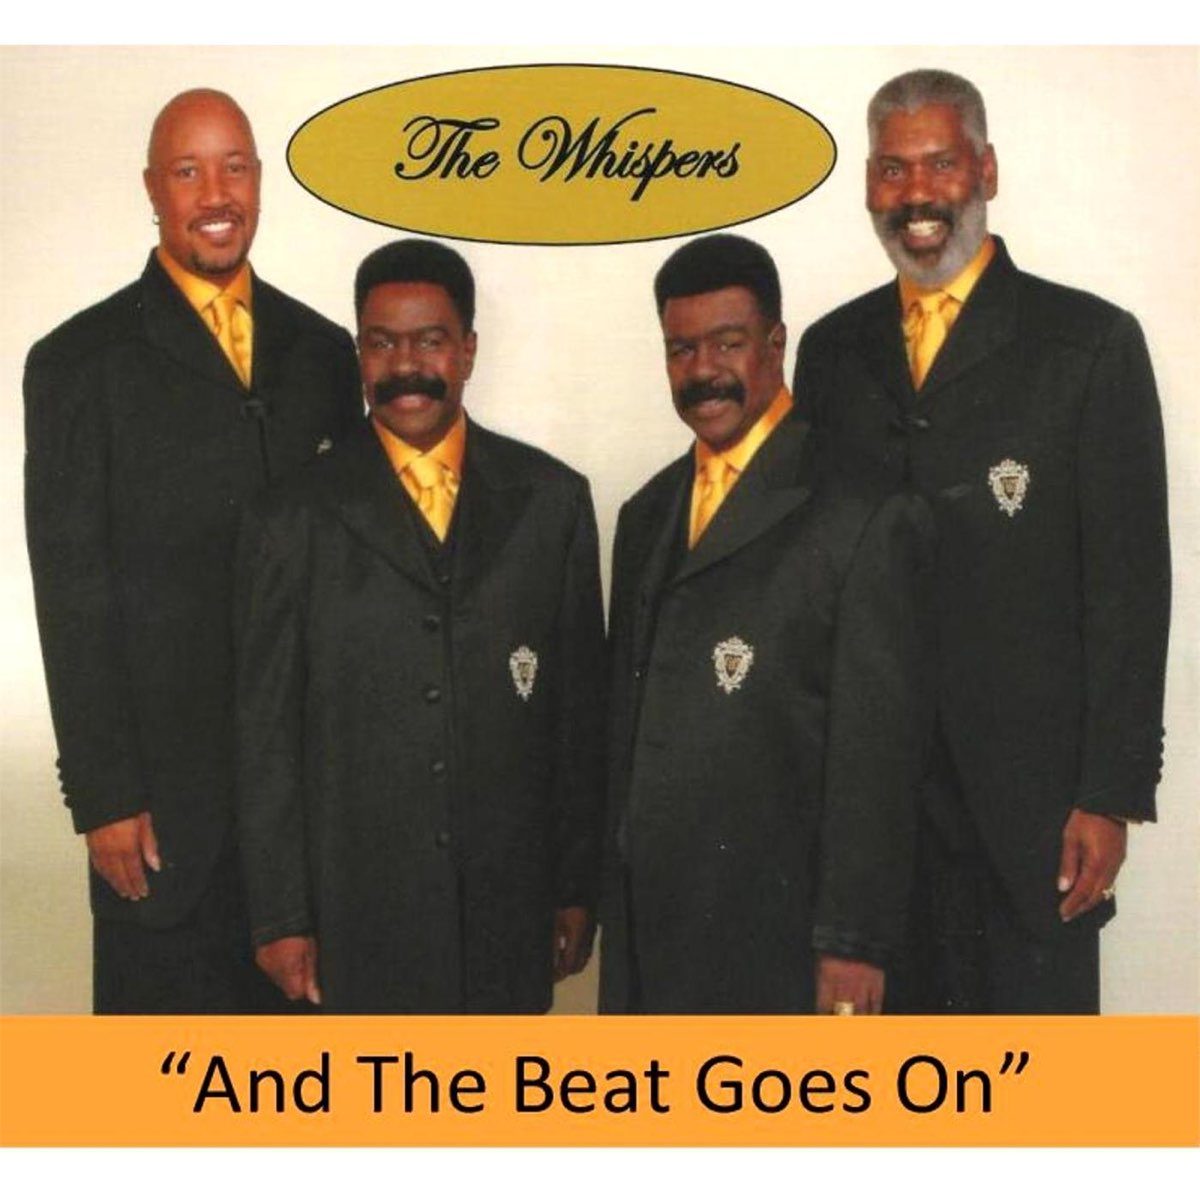 And the beat goes on. The Whispers - and the Beat goes on. The Beat goes on.